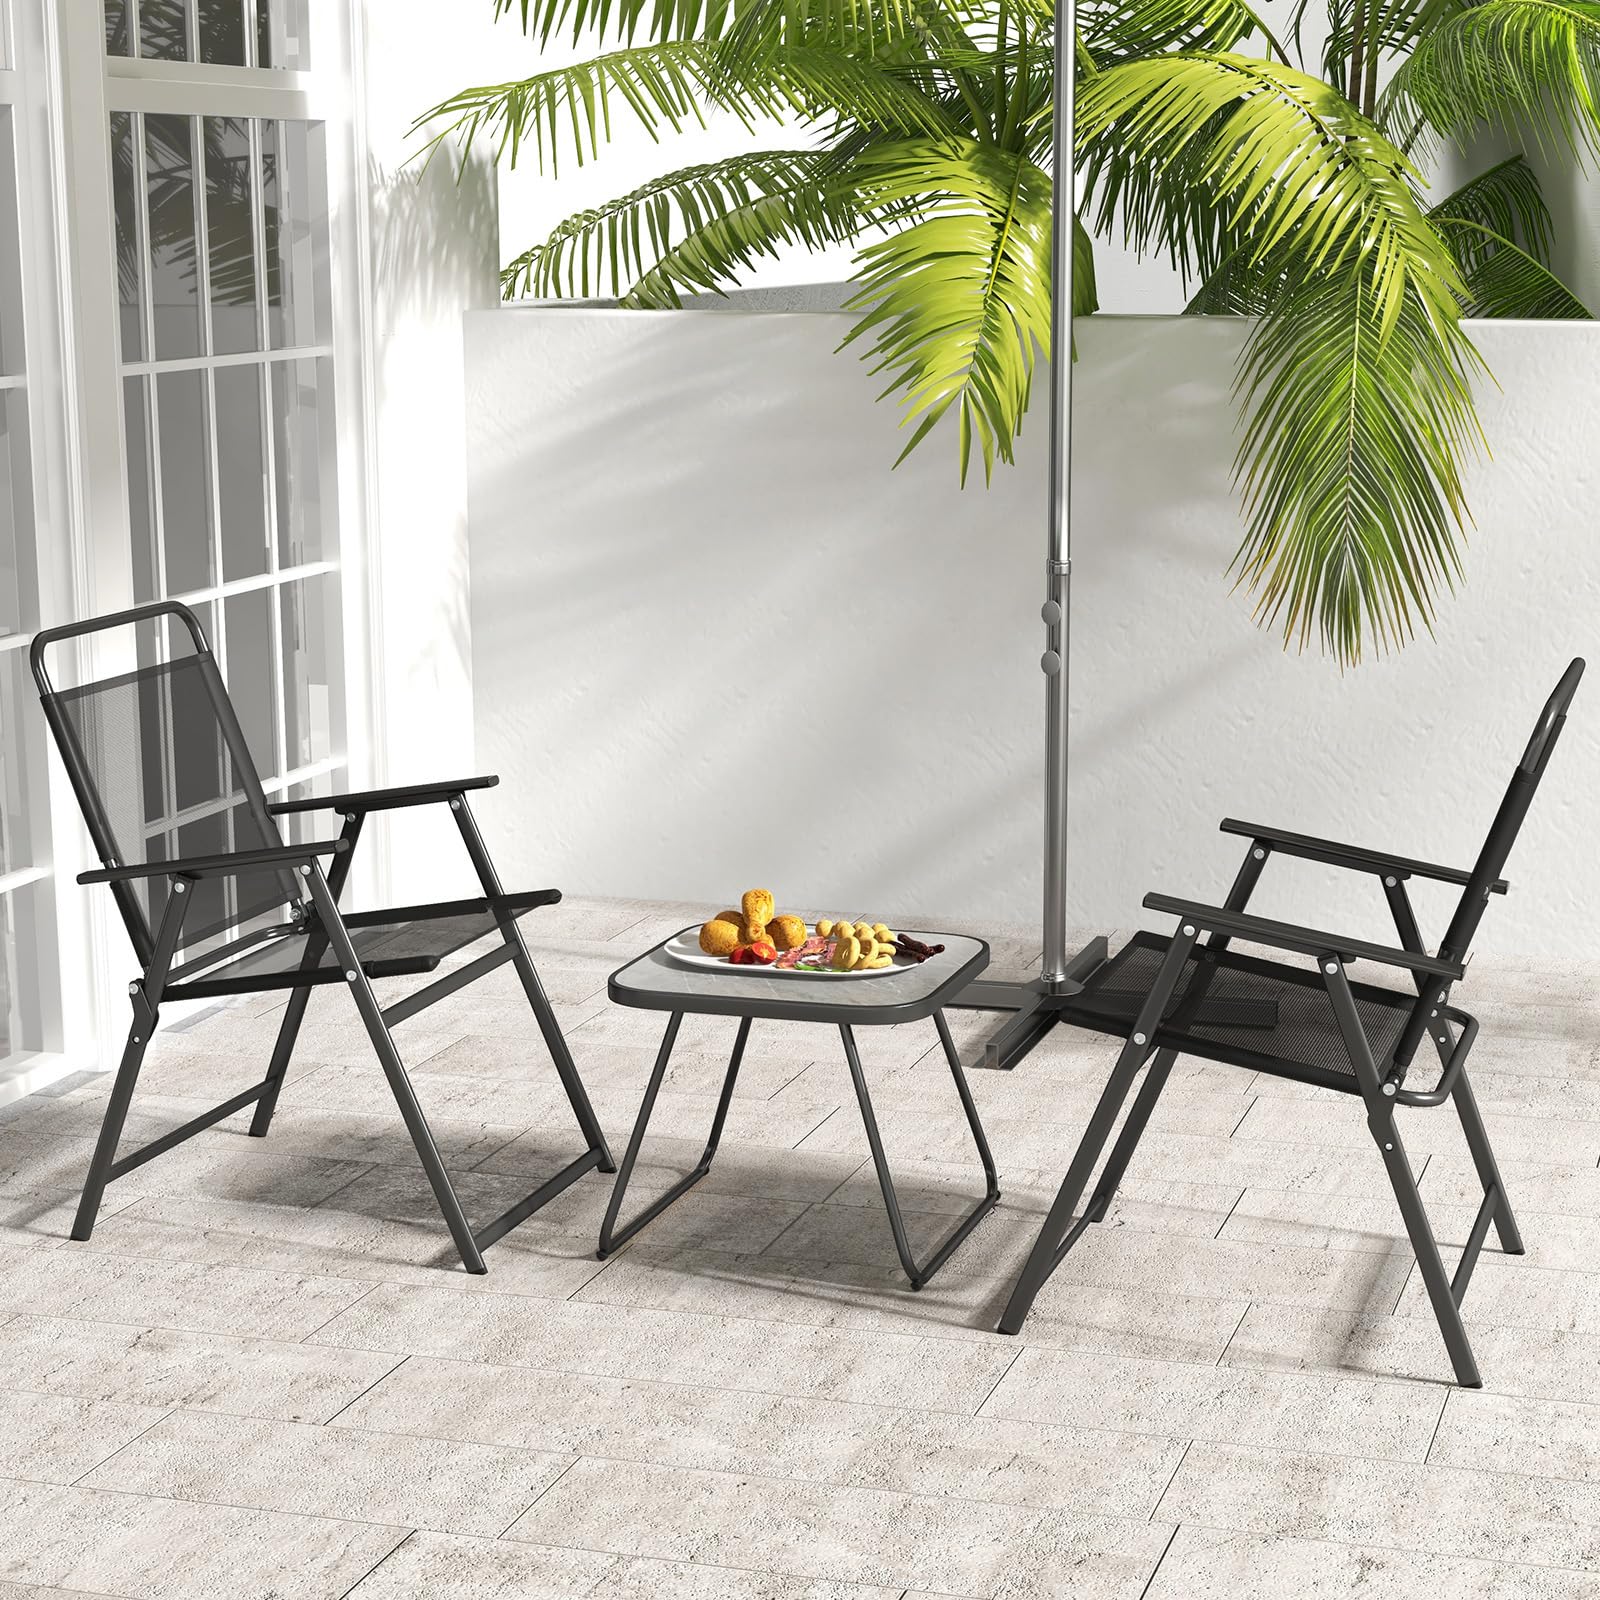 Giantex 3-Piece Patio Bistro Set, Outdoor Folding Chairs & Table Set, Outdoor Conversation Set for Balcony Yard Poolside